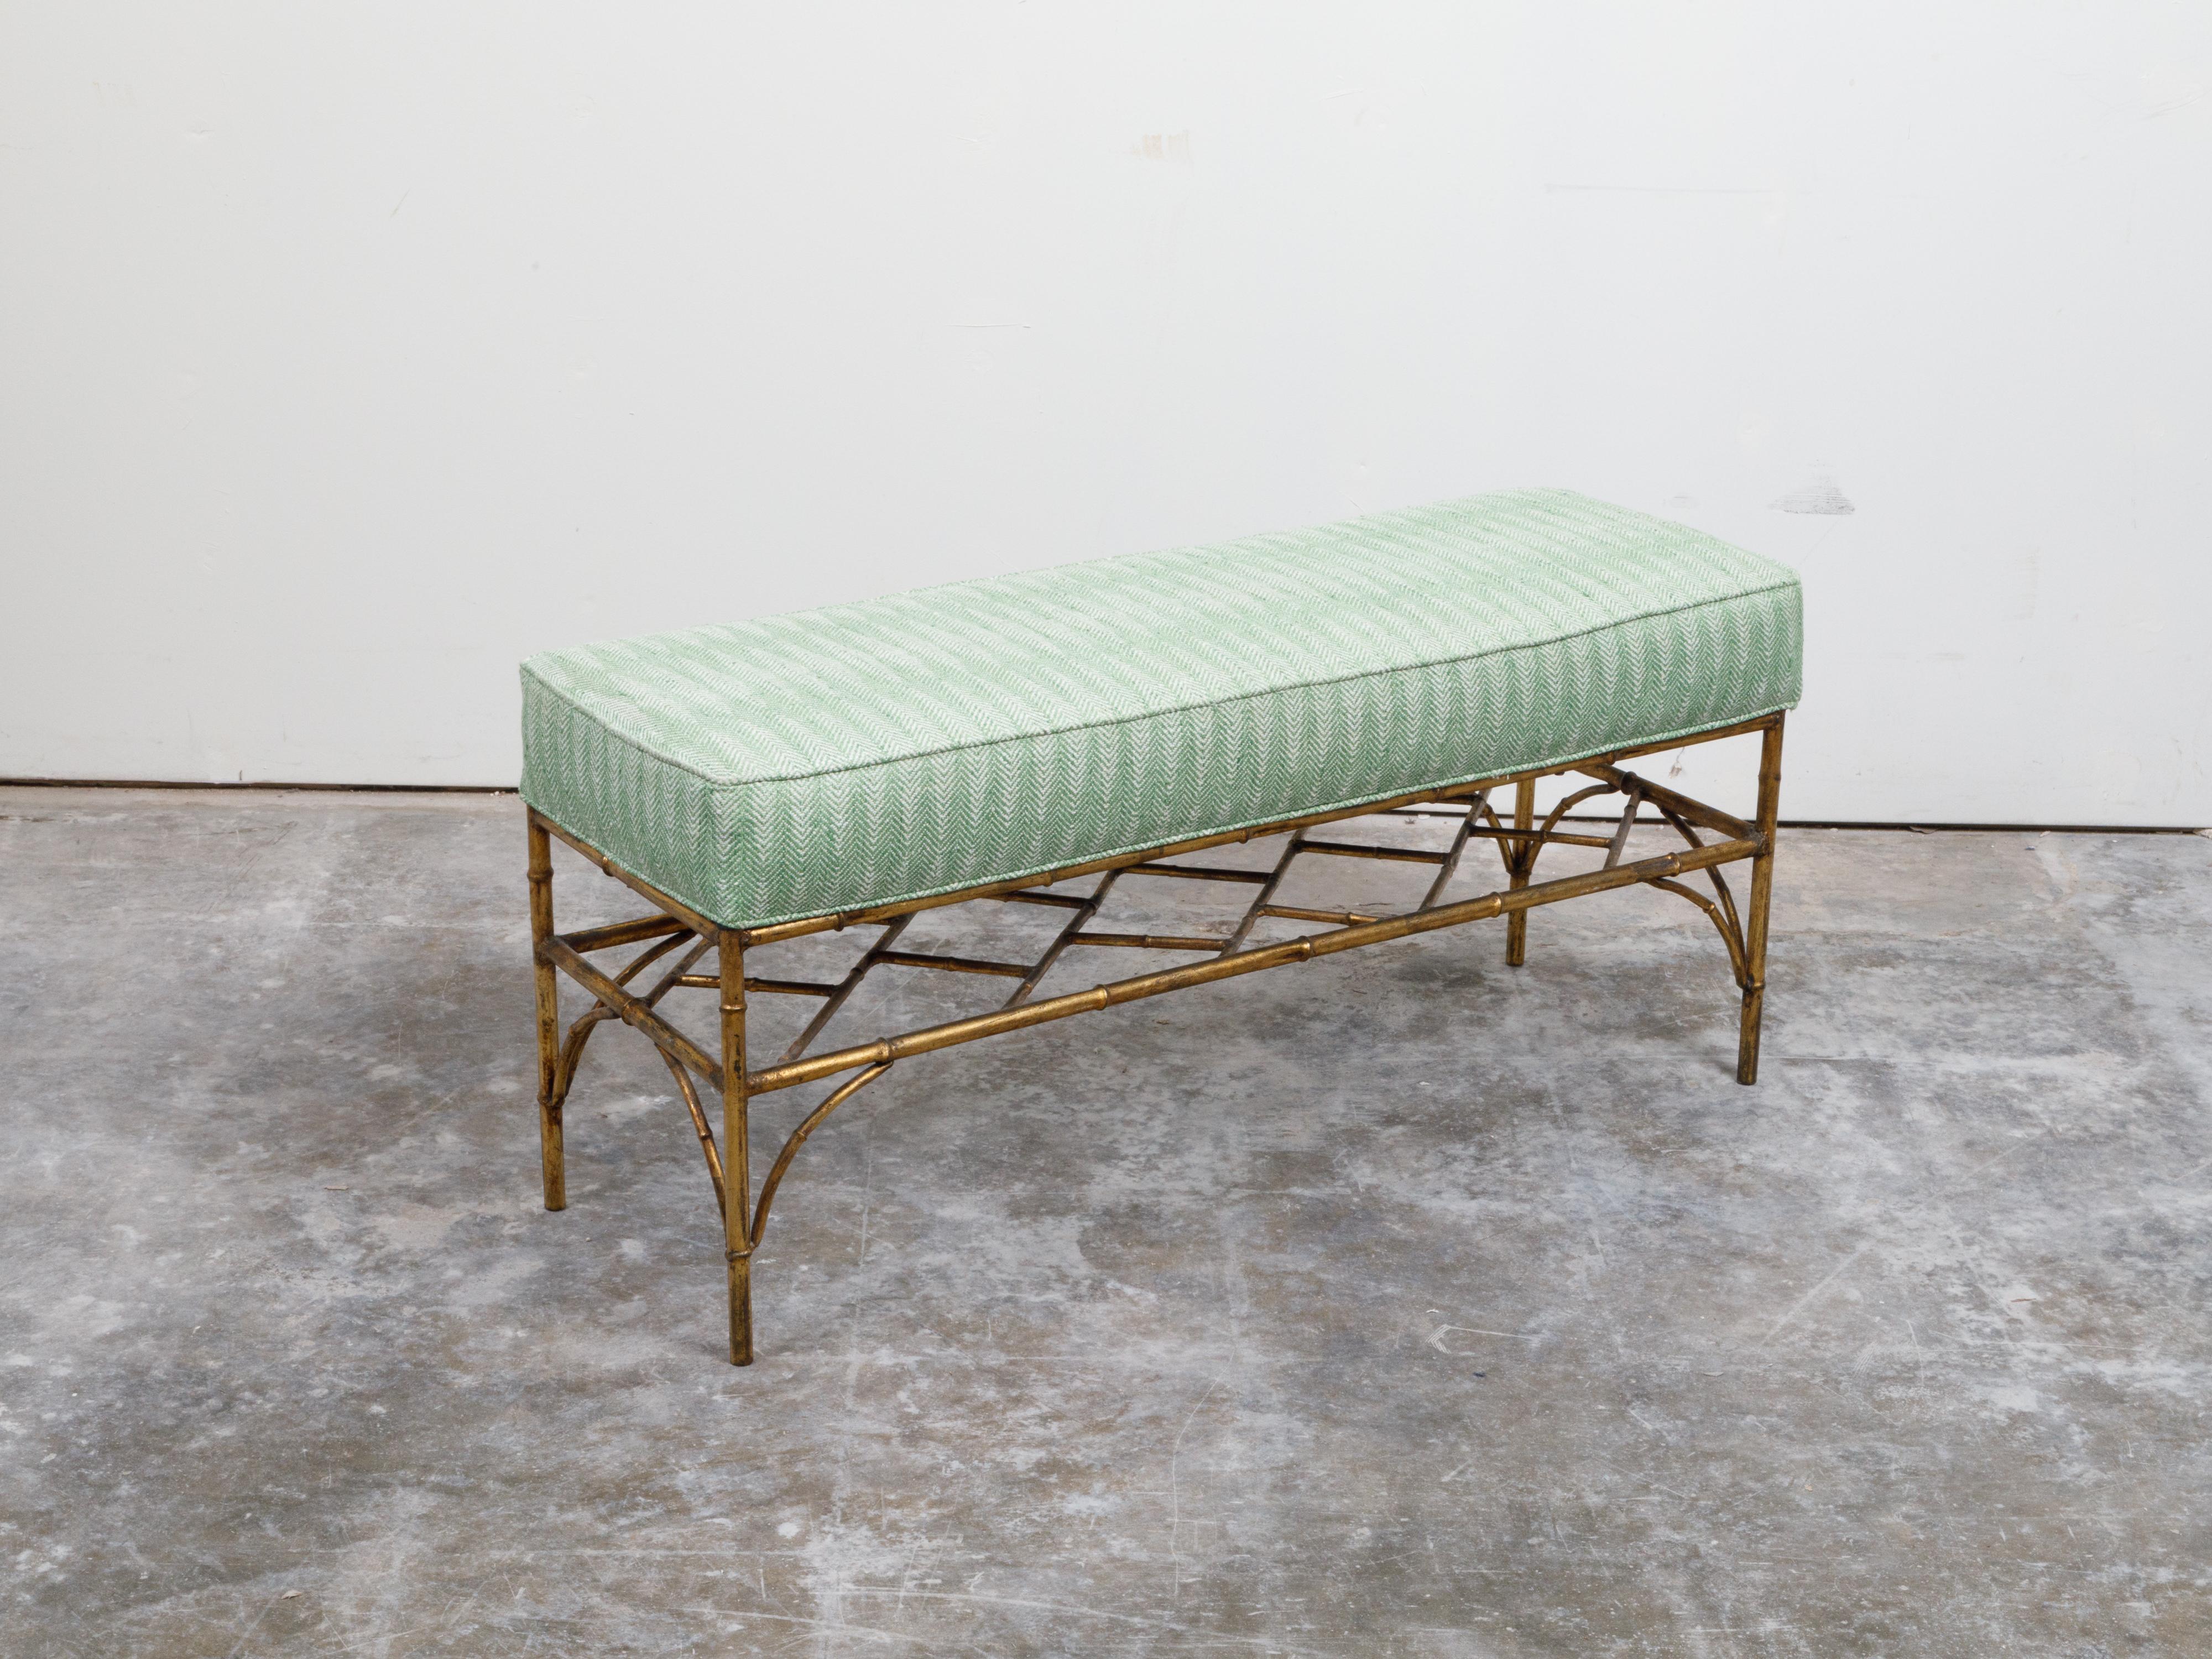 20th Century Italian Midcentury Gilt Metal Faux Bamboo Bench with Green Upholstered Seat For Sale